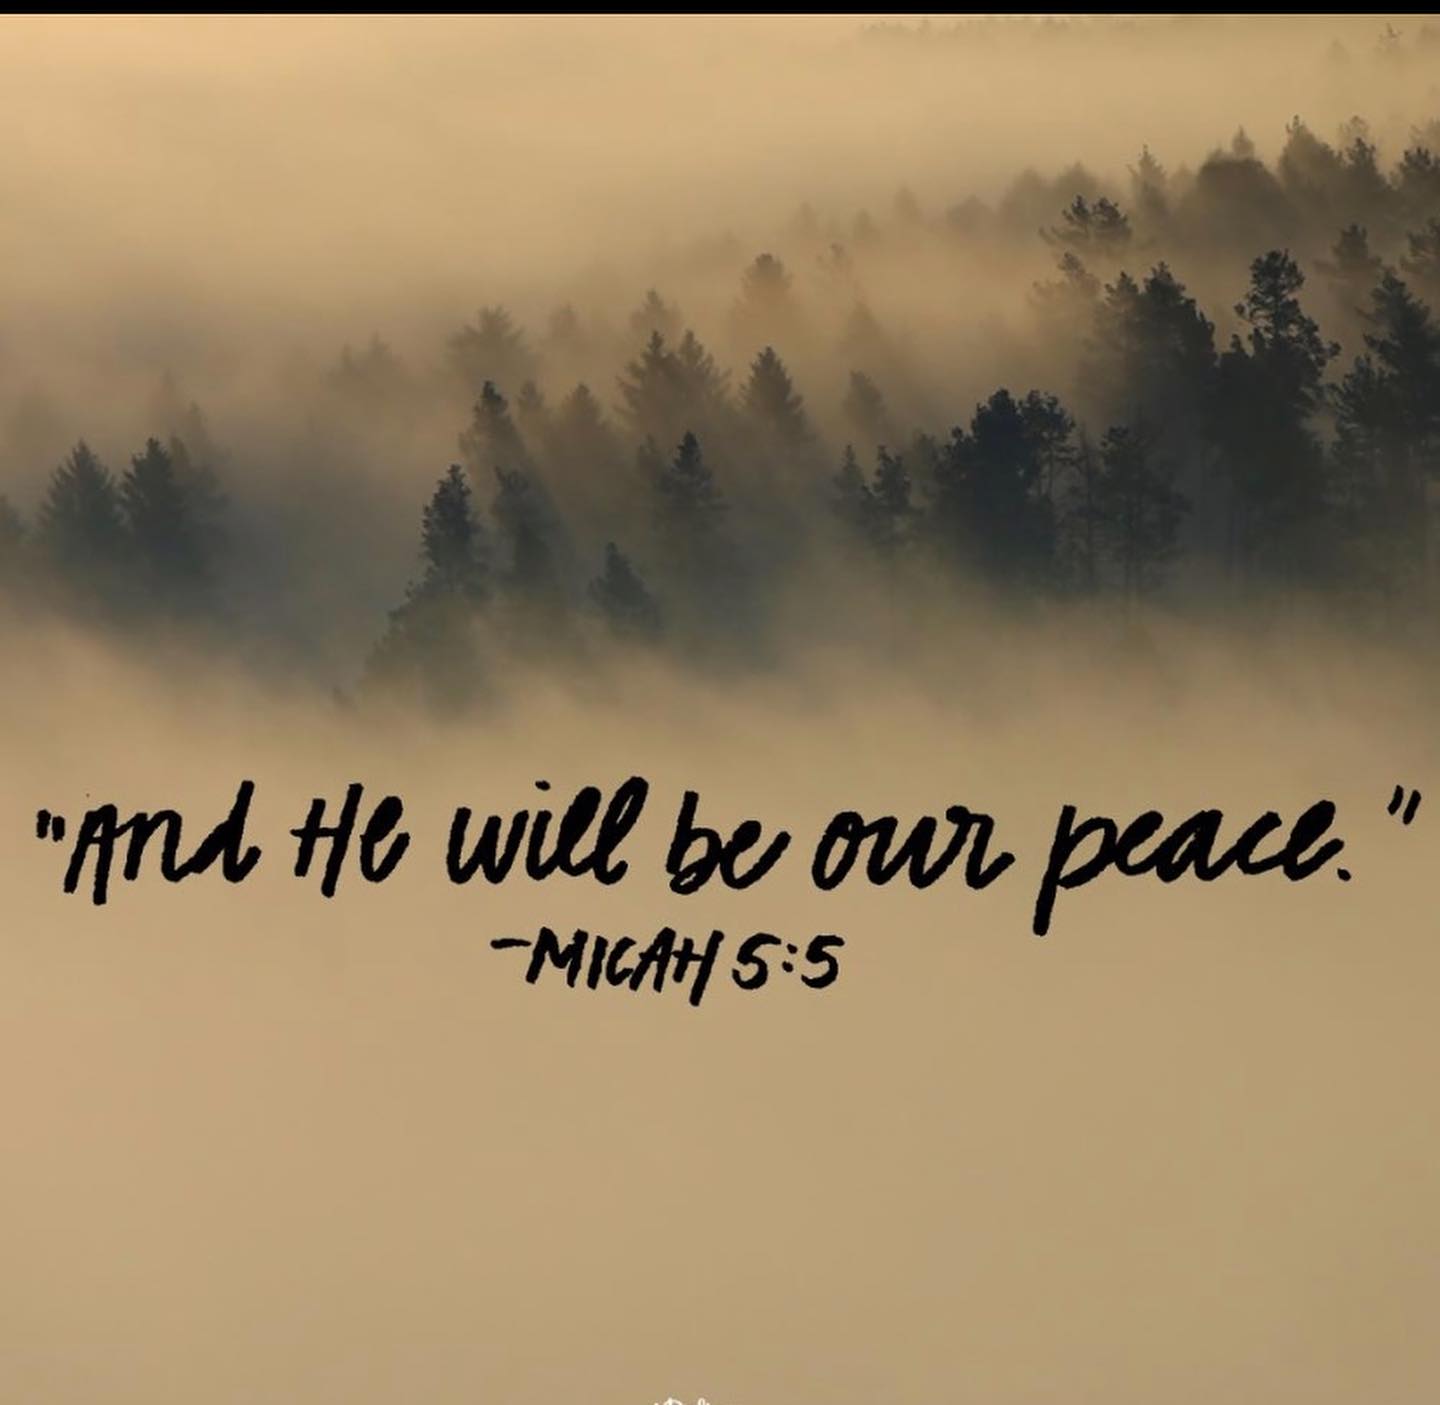 Where does your peace come from?  The world offers many ways to find peace, yet it doesn’t last and often leaves us searching. Some of Jesus’ final words were, “Peace I leave with you, My peace I give you; not as the world gives do I give to you. Let not your heart be troubled, neither let it be afraid.” (John 14:27)Join us Sunday 10AM @fallbrookvineyardchurch for week two of Advent as we learn about how the Prince of Peace was born in a little town called Bethlehem, prophesied hundreds of years prior. The Bible is very accurate about the place of Jesus’ birth and details of His return. John 1:29 says “The next day John saw Jesus coming unto him, and said, Behold the Lamb of God, which taketh away the sin of the world.” Folks, there is nothing more Peaceful than knowing that God casts our sin into the depths of the sea. We are forgiven. Bring your bibles, chairs and some friends 🤍#advent#olittletownofbethlehem#peace#thewaythetruththelife#thebible#hymns#prayer #lifeabundant#community #support #love#familyofgod #outdoorchurch #organicchurch #outlawchurch #dogfriendlychurch#fallbrookvineyardchurch#thevineyard1924